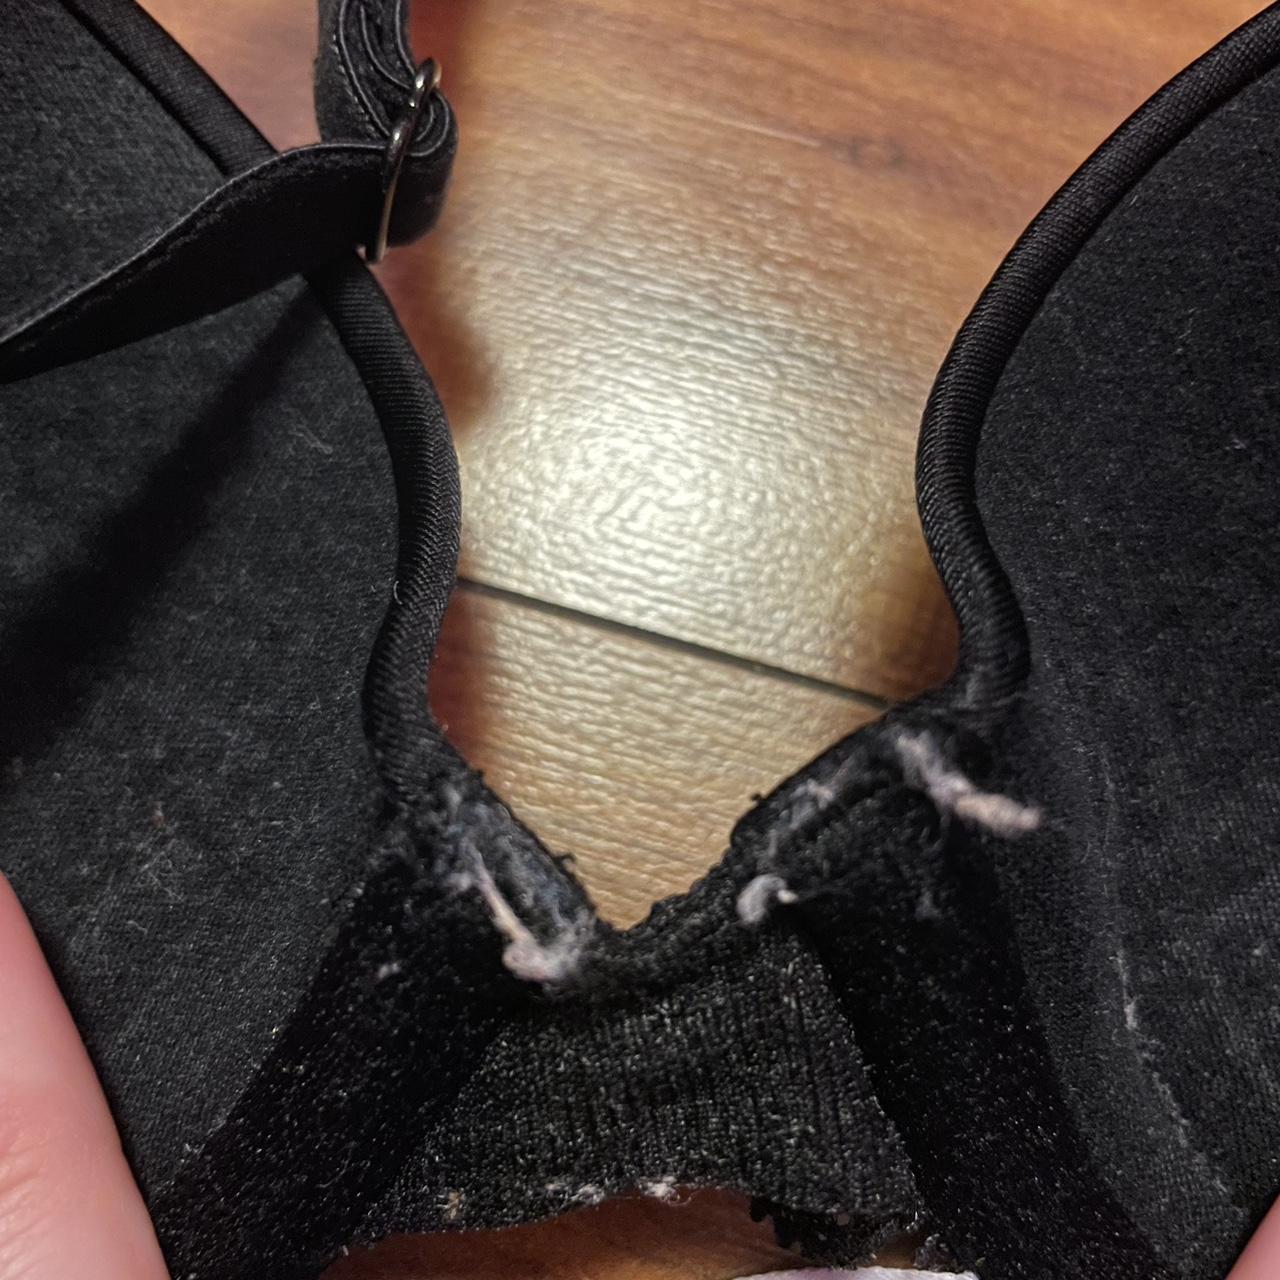 Black push up bra size 32B with some lace on straps - Depop